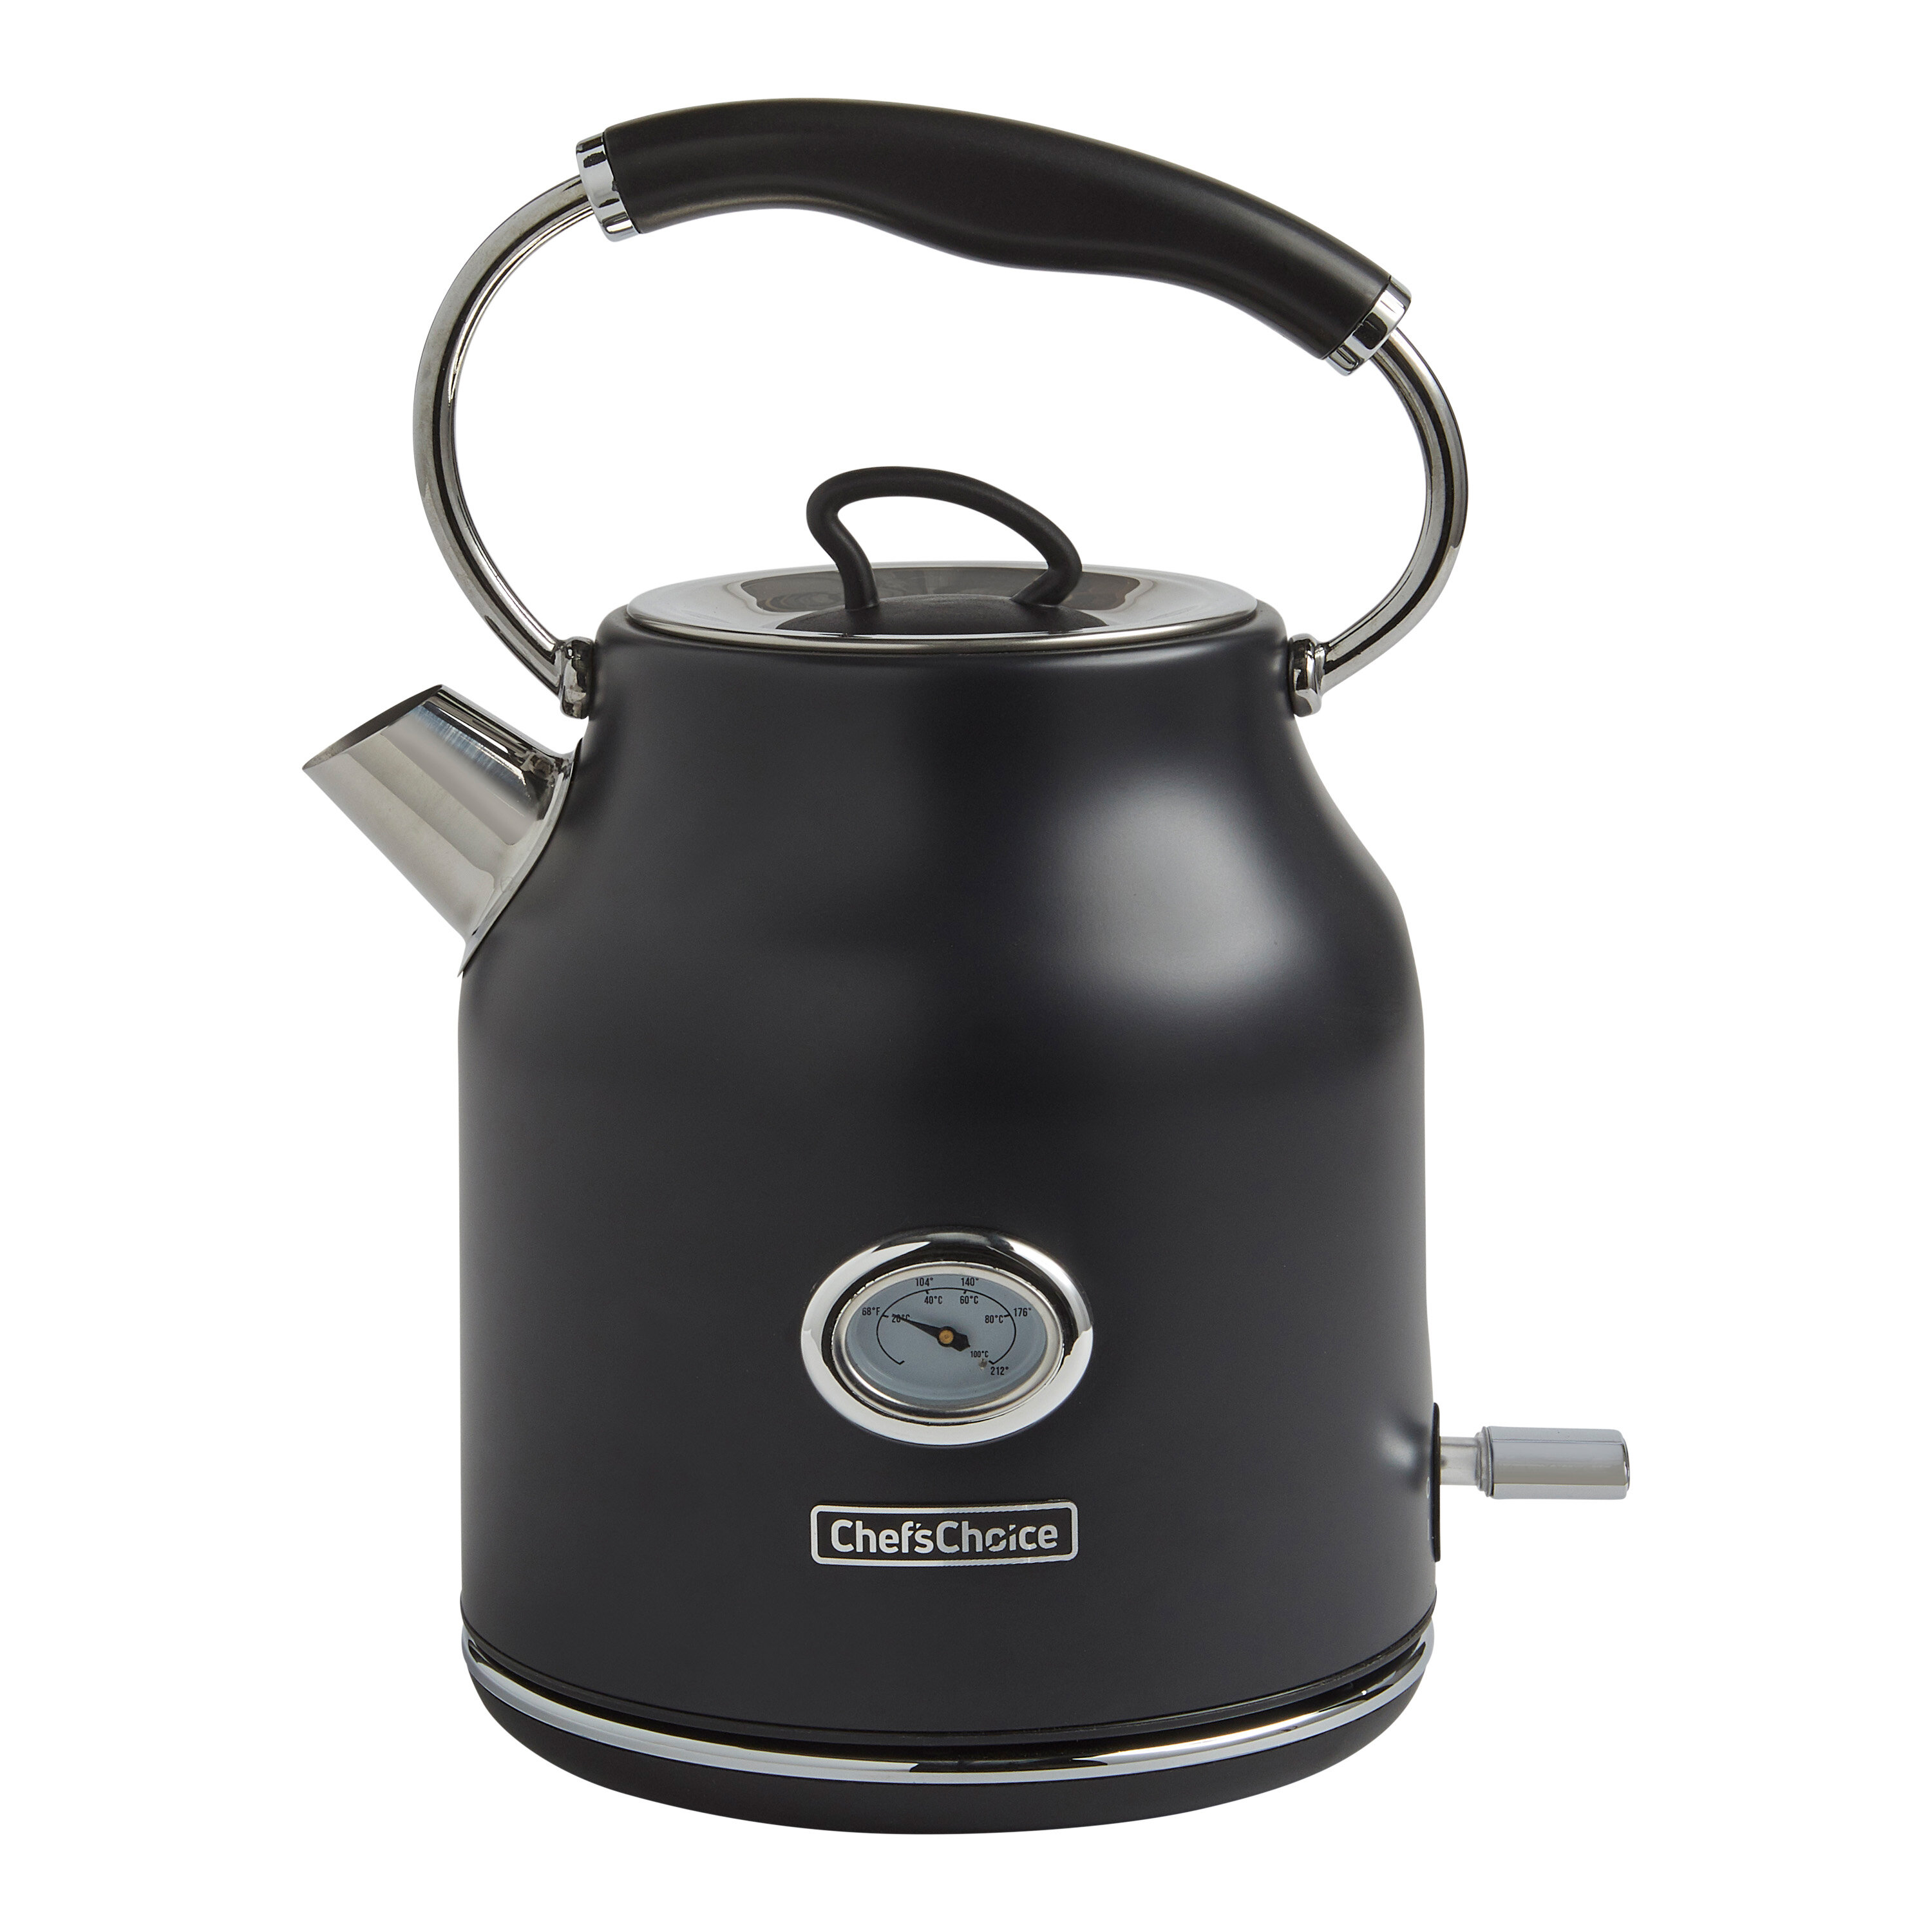 Best Buy: Haden Highclere 1.5 L Electric Kettle Stainless Steel